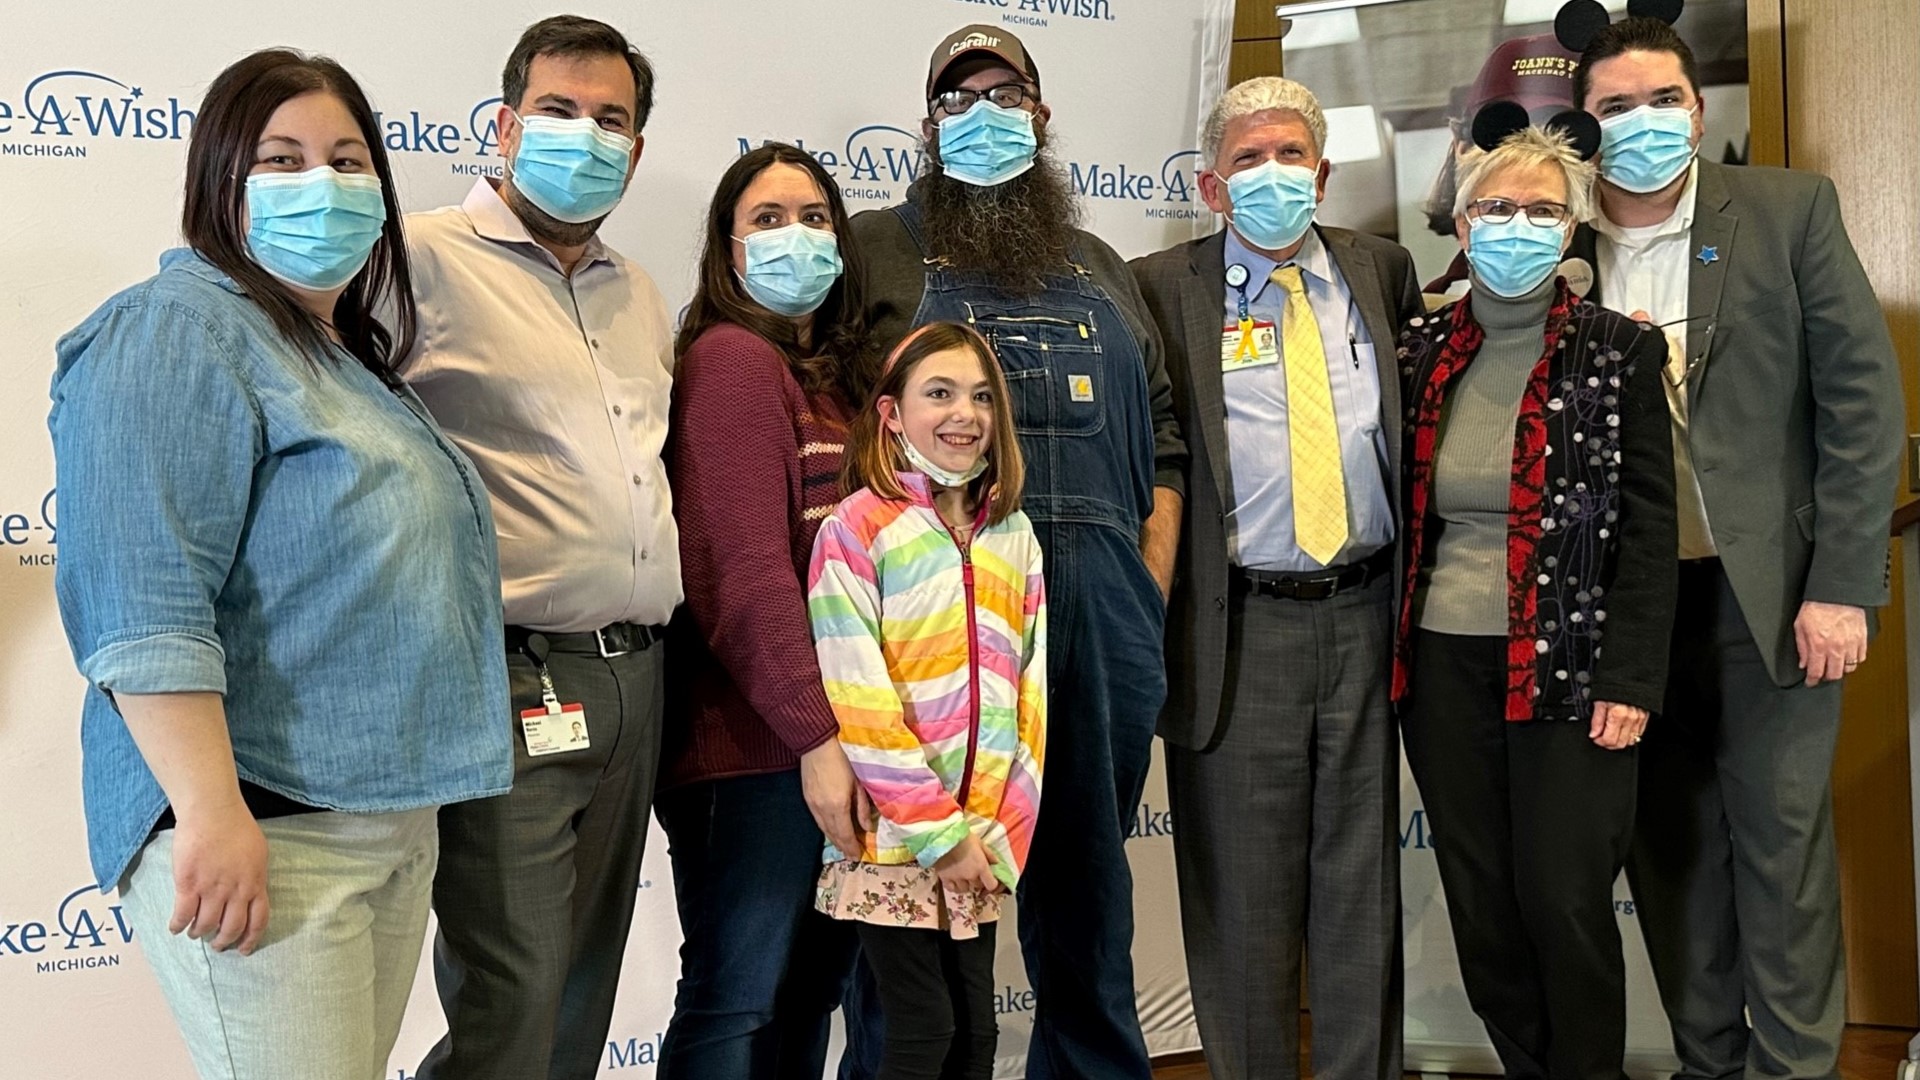 Lily's family, her medical team and Make-A-Wish supporters all gathered in person for the first time since the pandemic, this afternoon to tell her the big surprise.